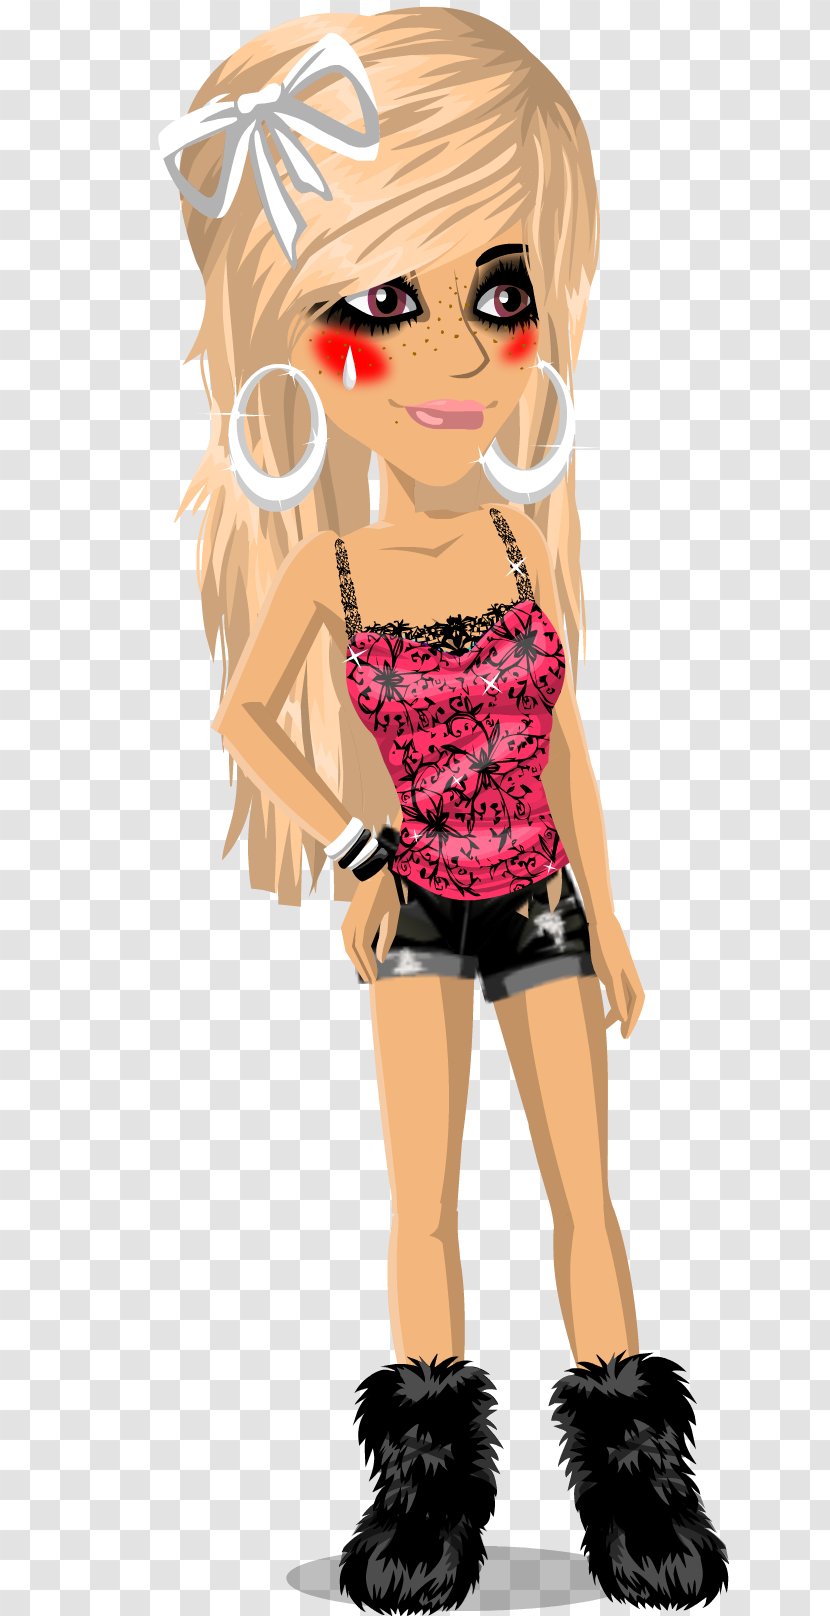 MovieStarPlanet Game Film Celebrity Image - Tree - Pinterest Elementary Teacher Outfits Transparent PNG